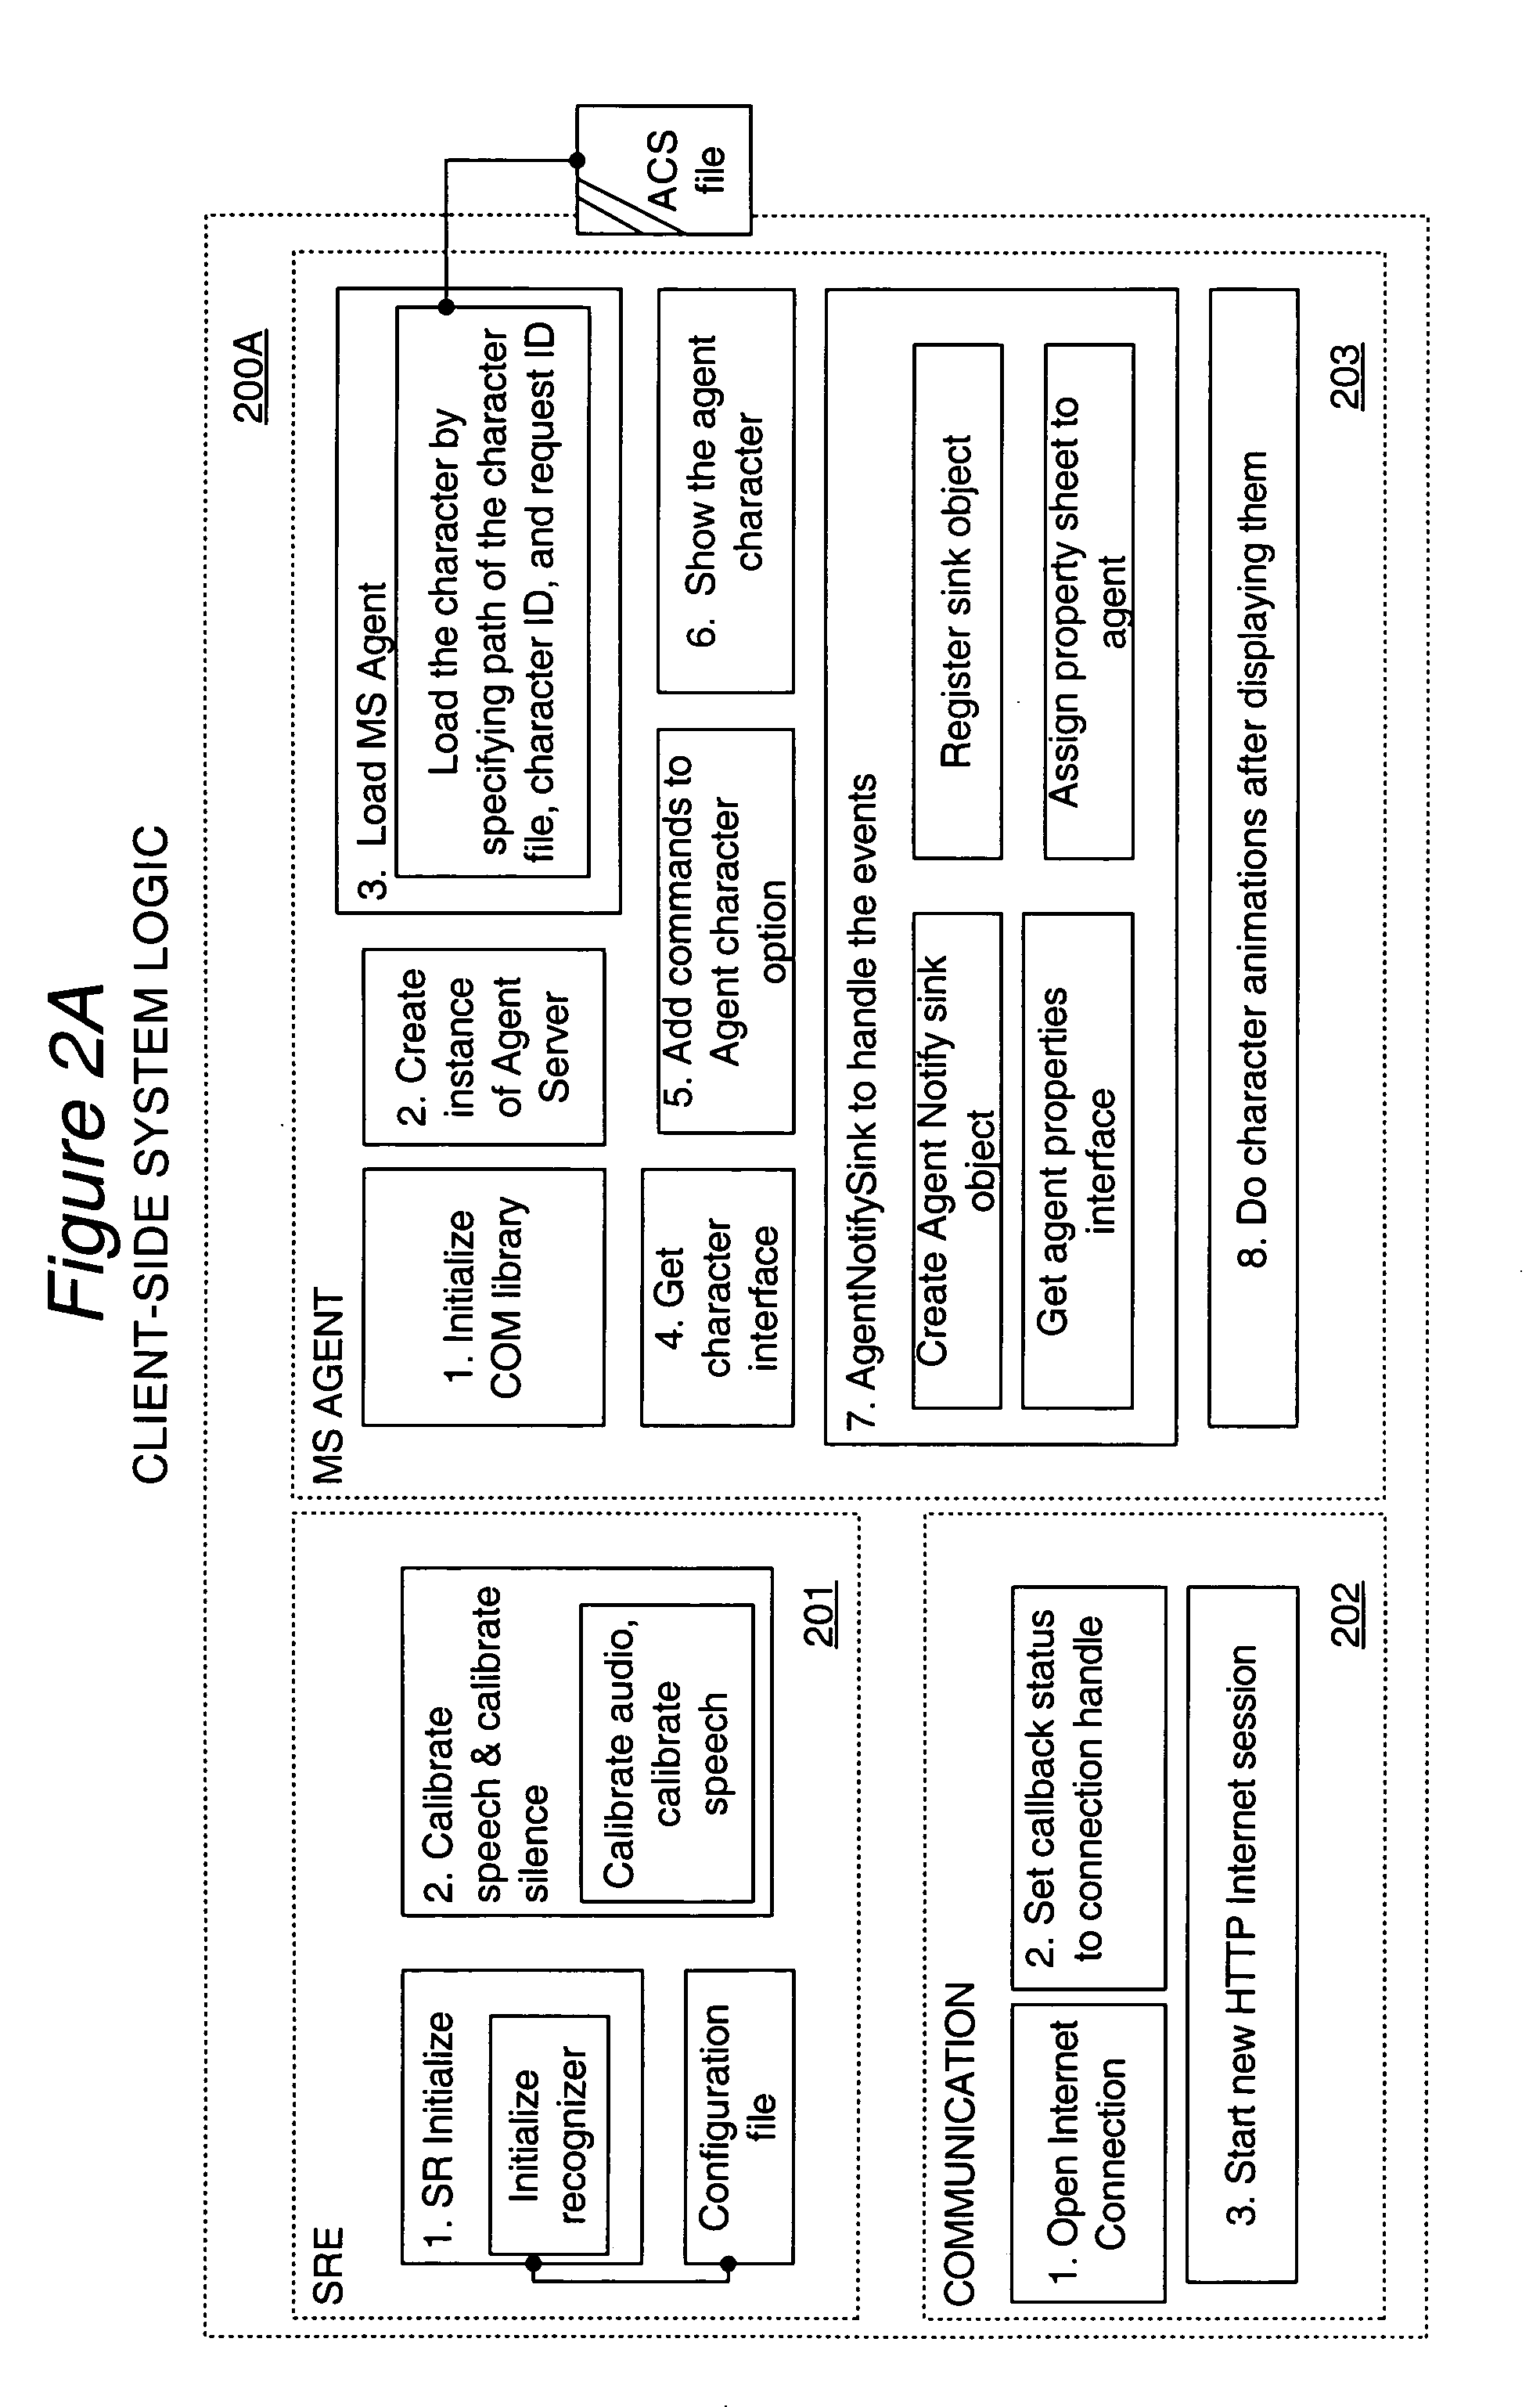 System & method for processing sentence based queries